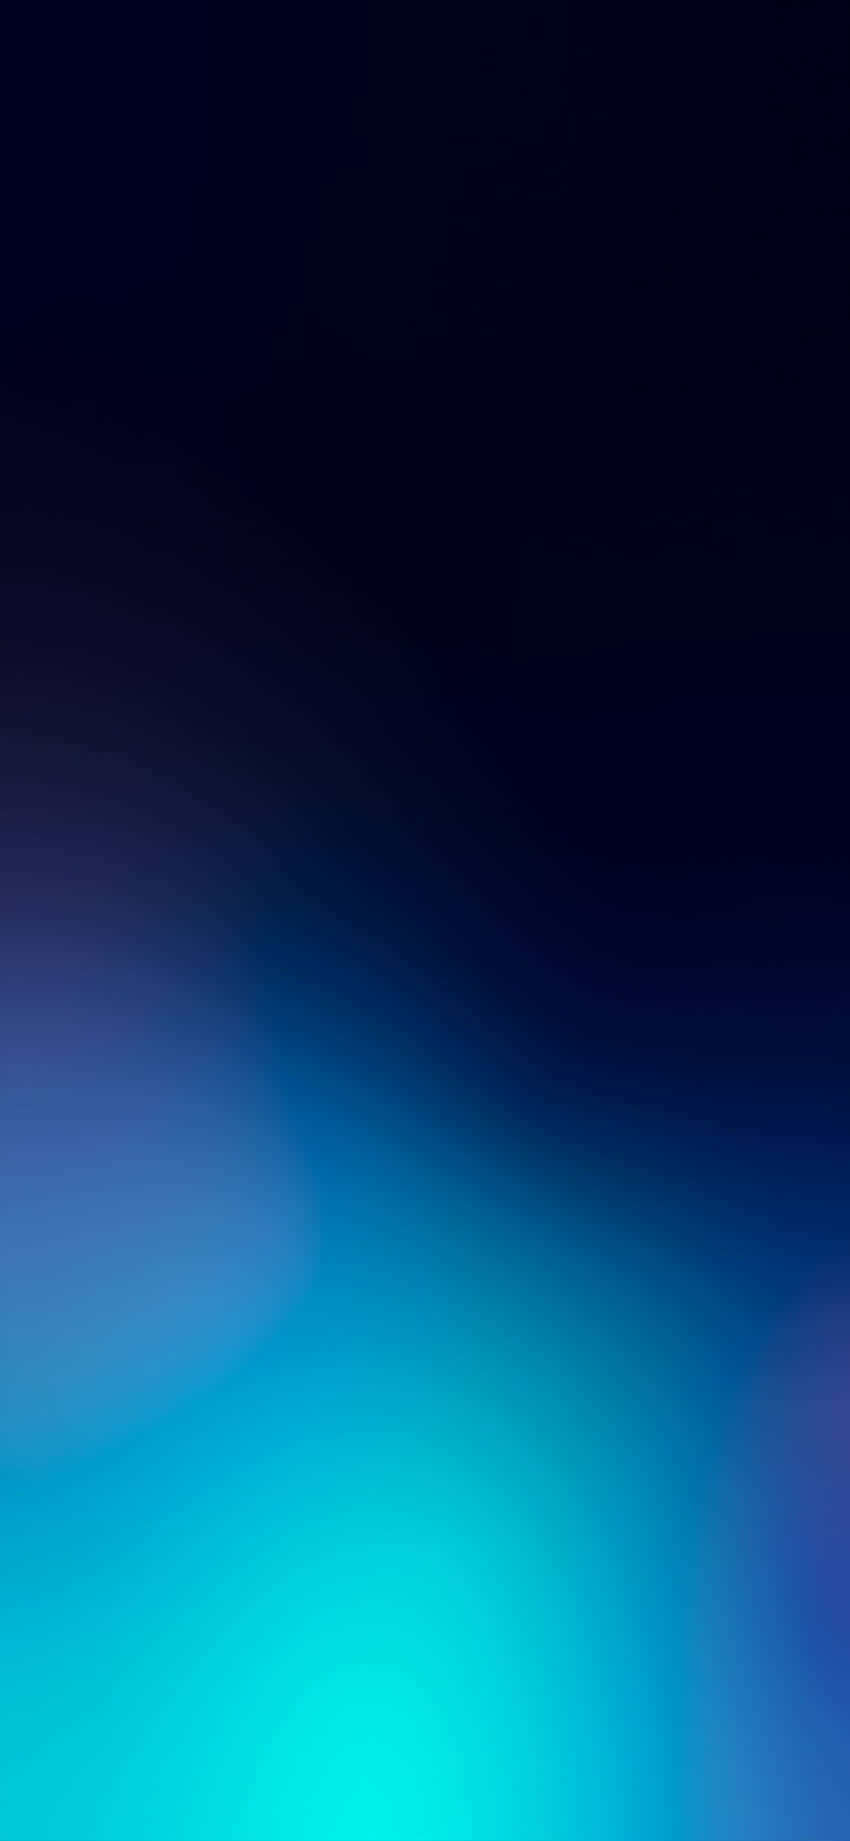 The Alluring Black and Blue iPhone Wallpaper